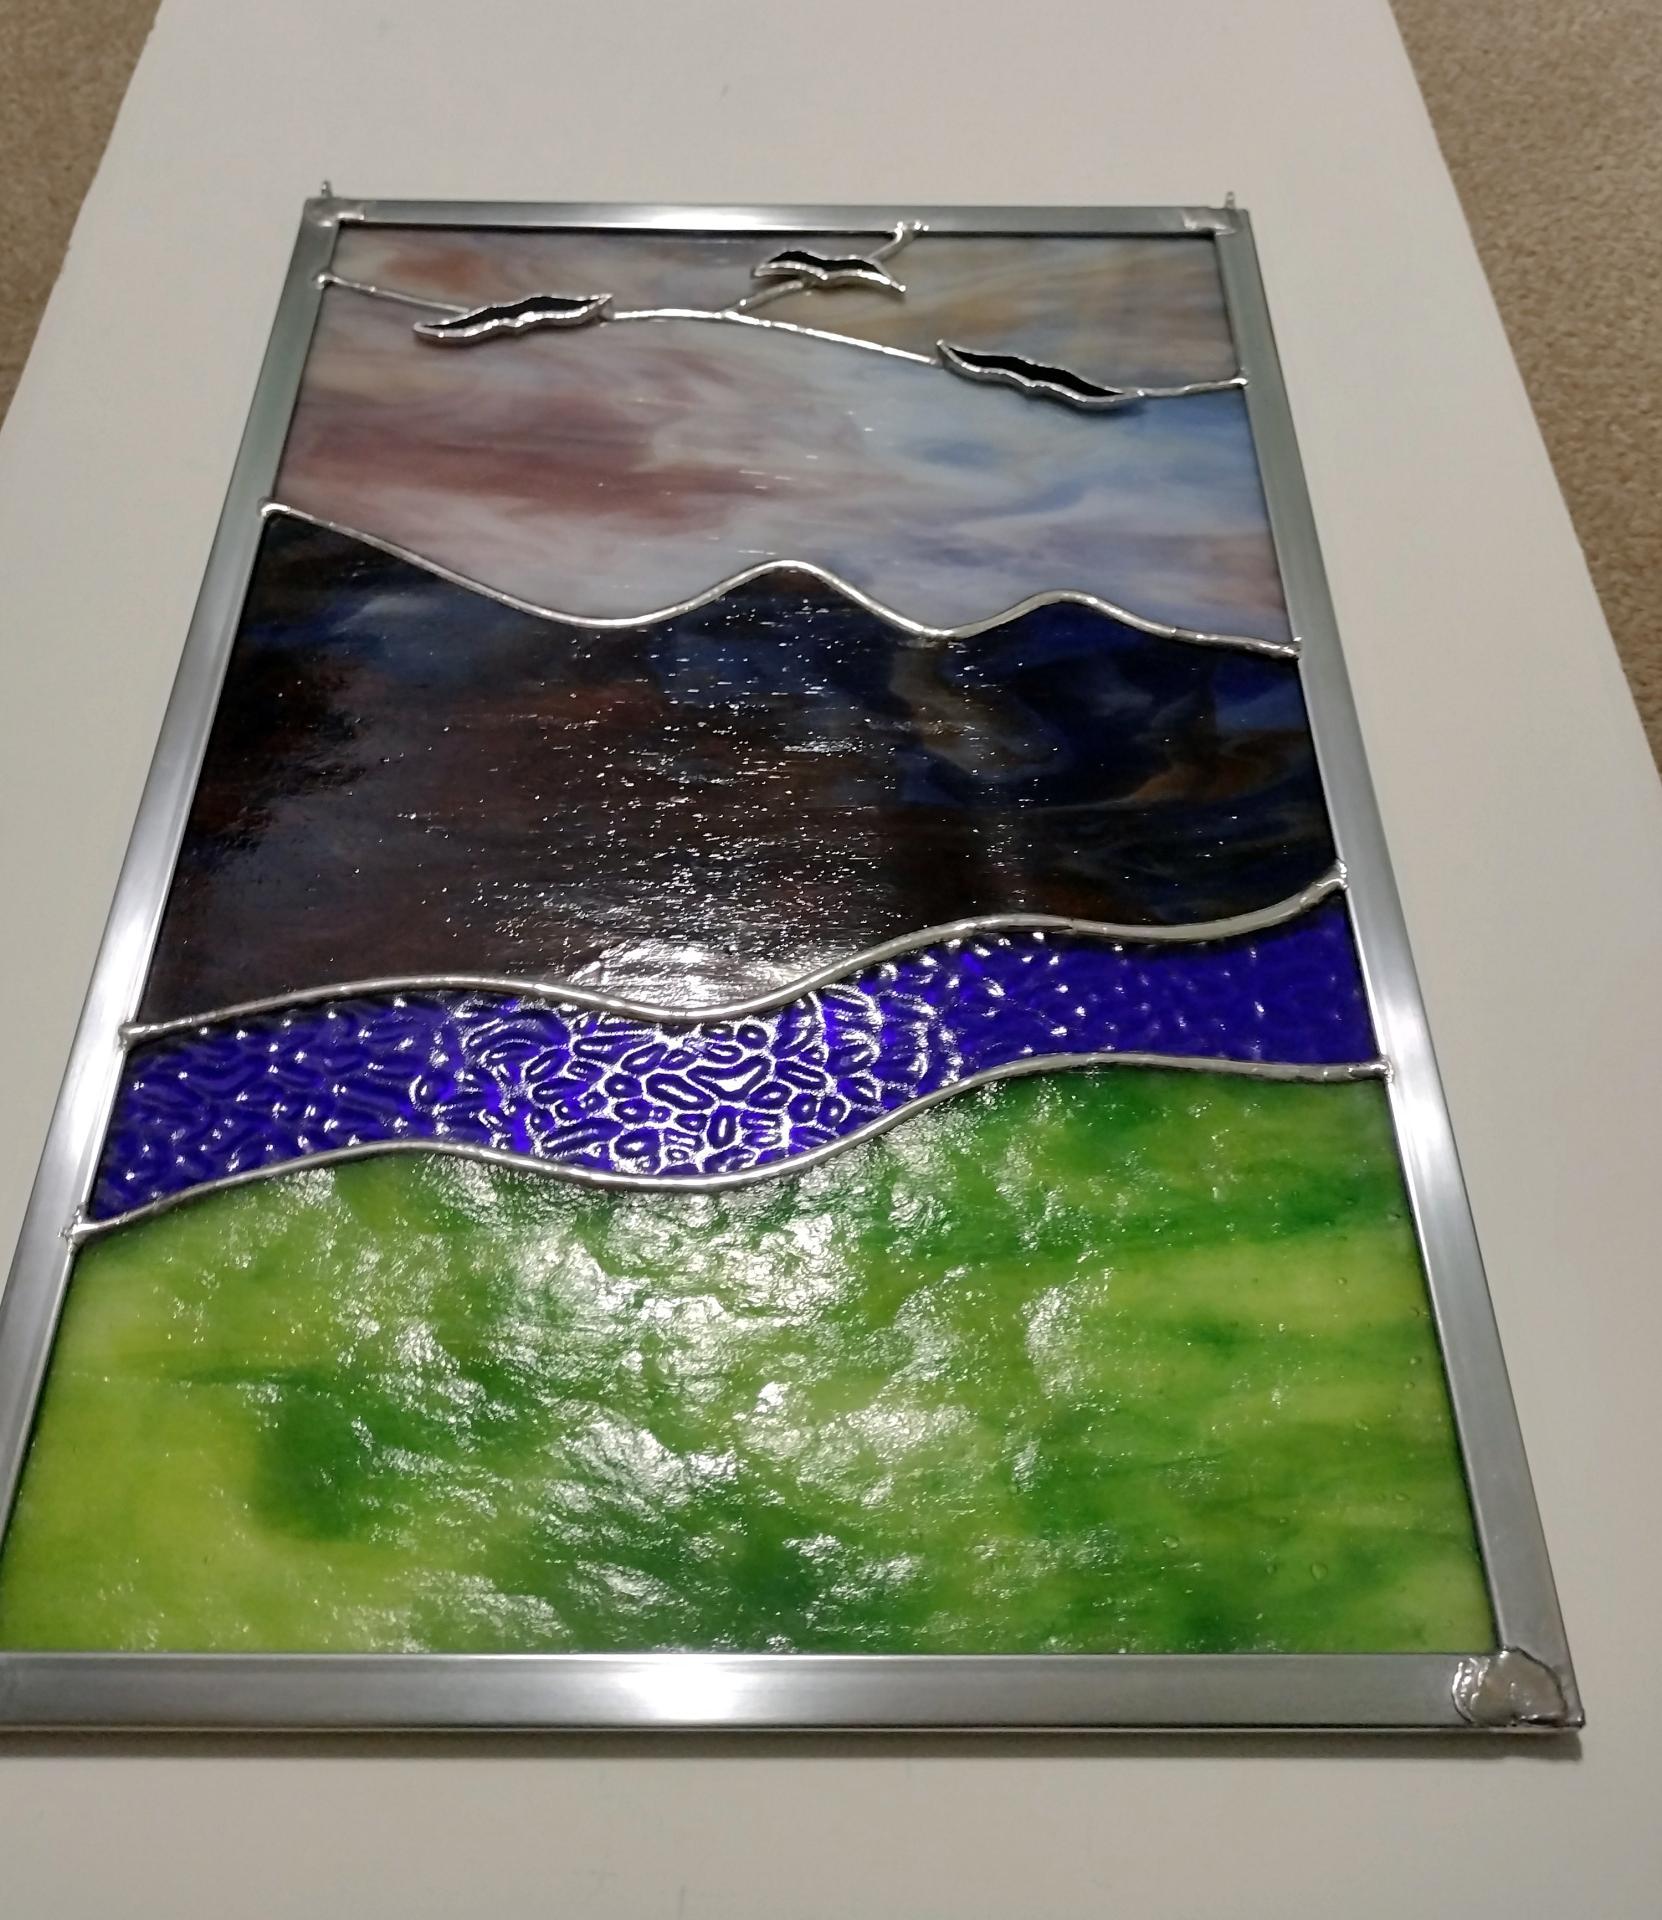 Mountain Sunrise Stained Glass Window Panel